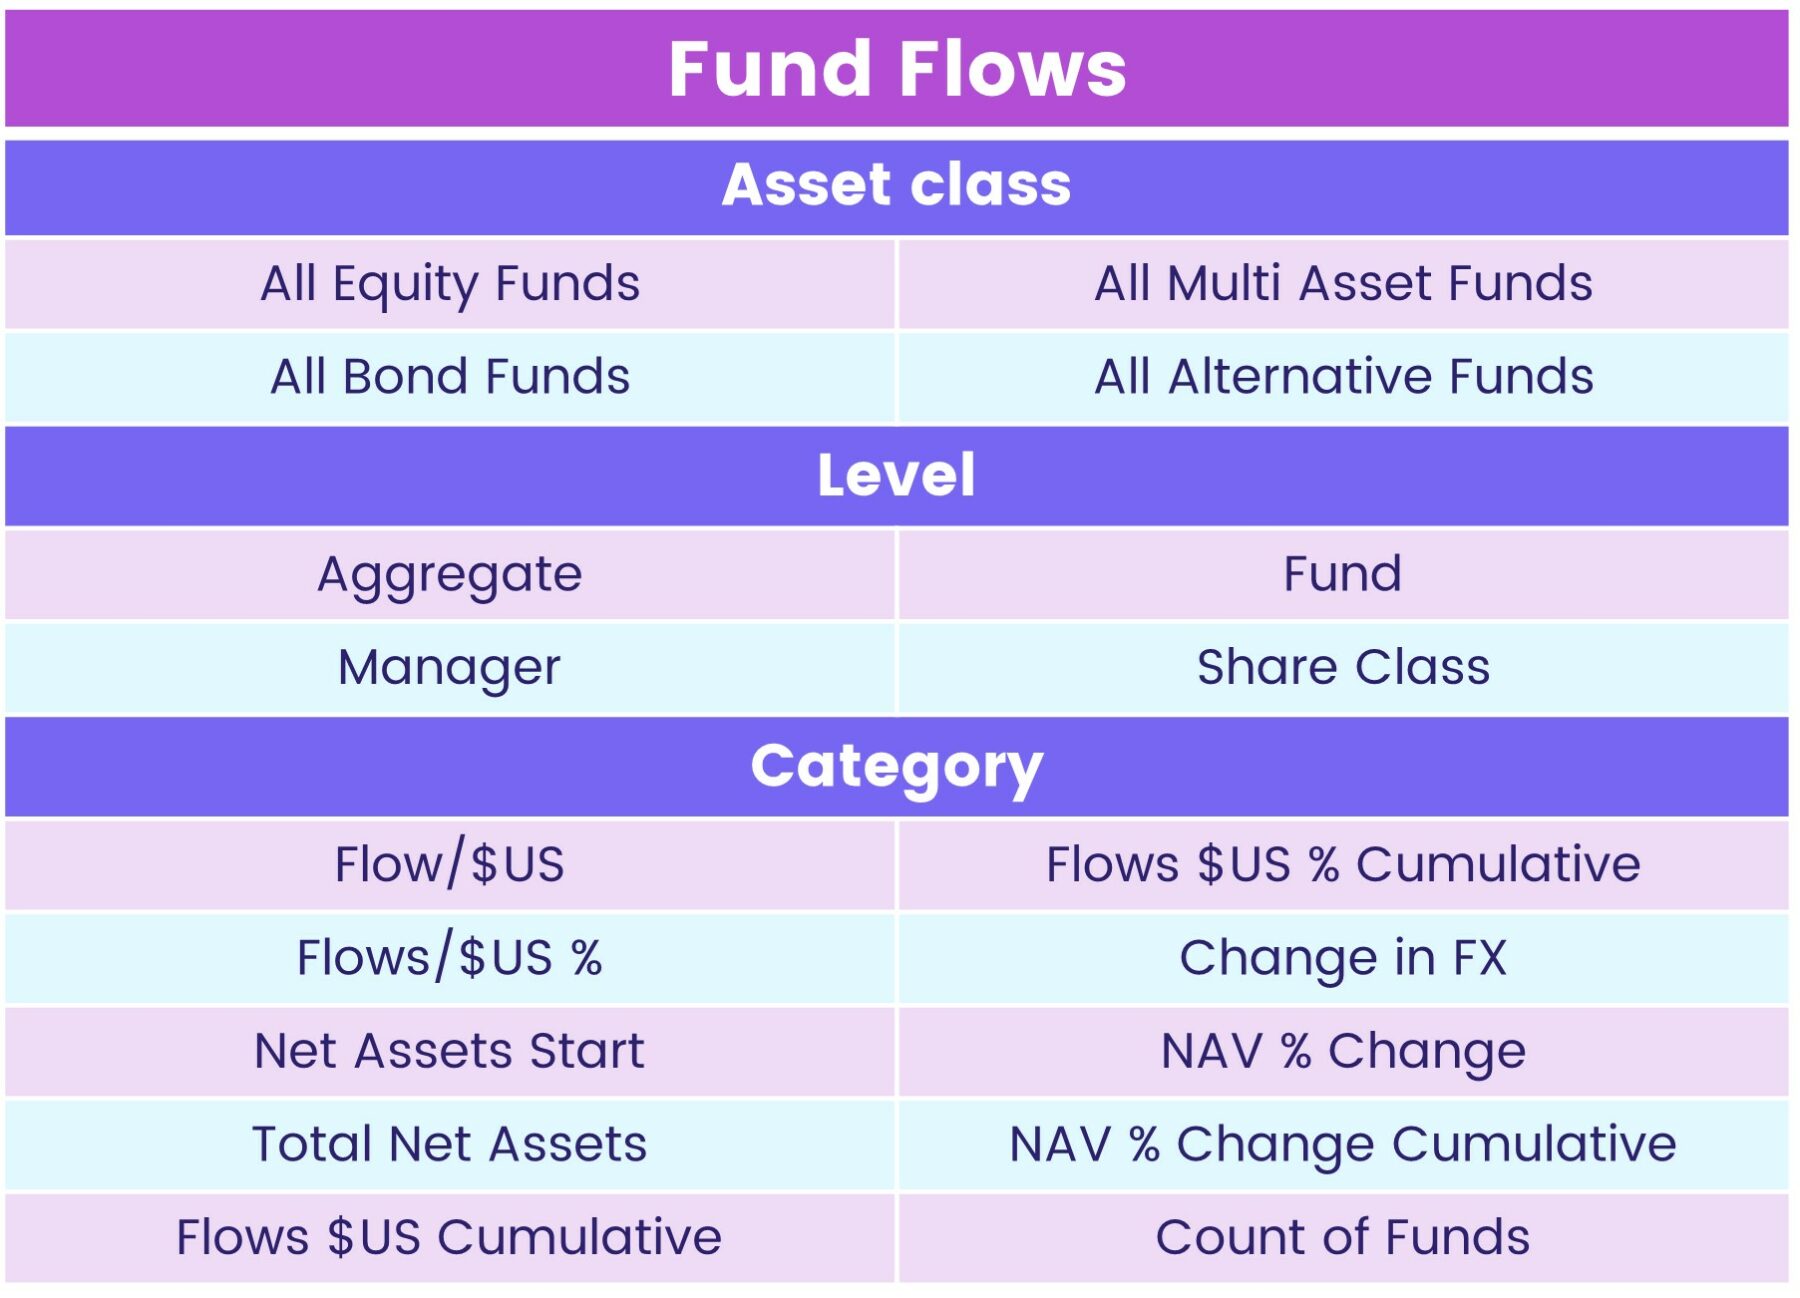 Image of a table containing some of EPFR's Fund Flow and Allocations filtering options, such as Asset Class, Level or Category.